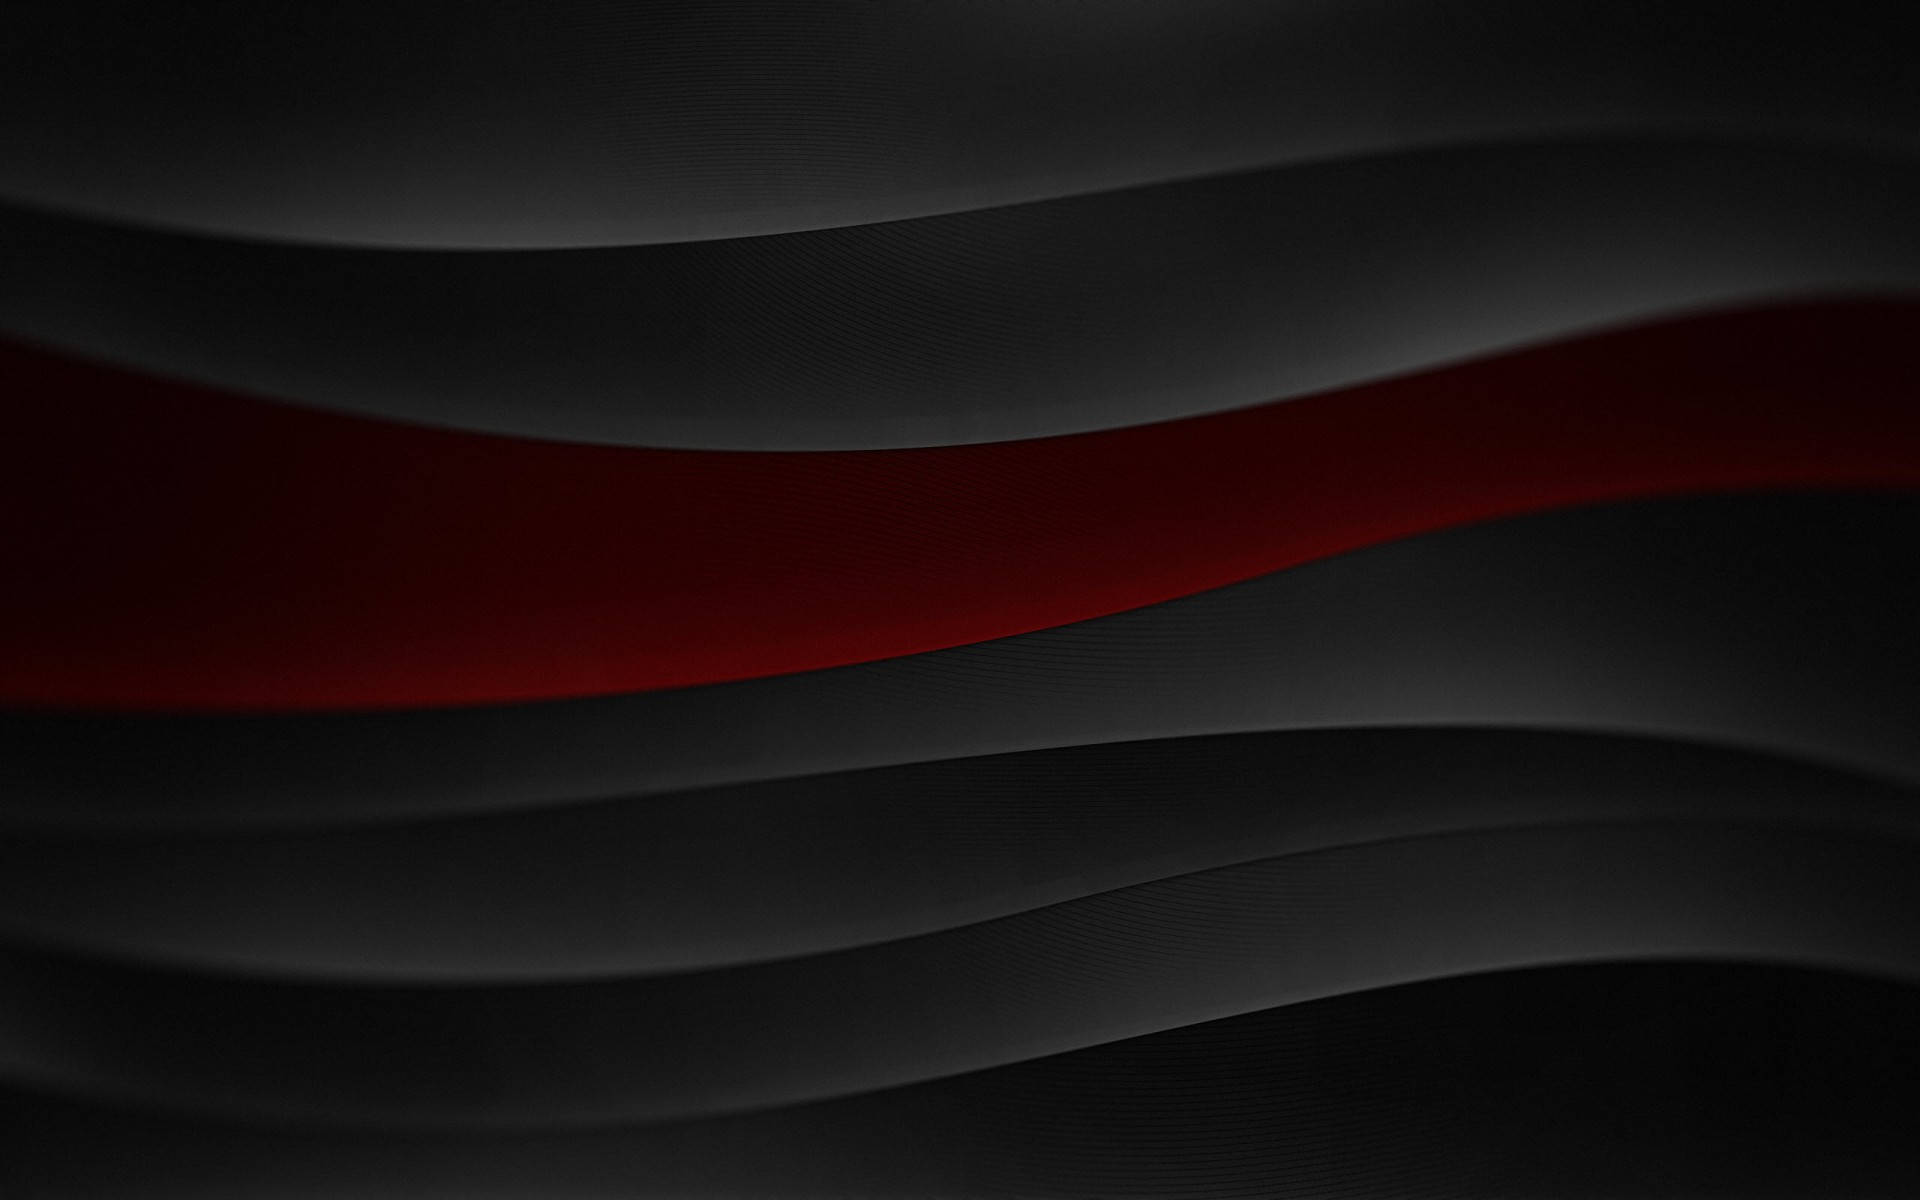 A Black And Red Abstract Wallpaper With Wavy Lines Wallpaper